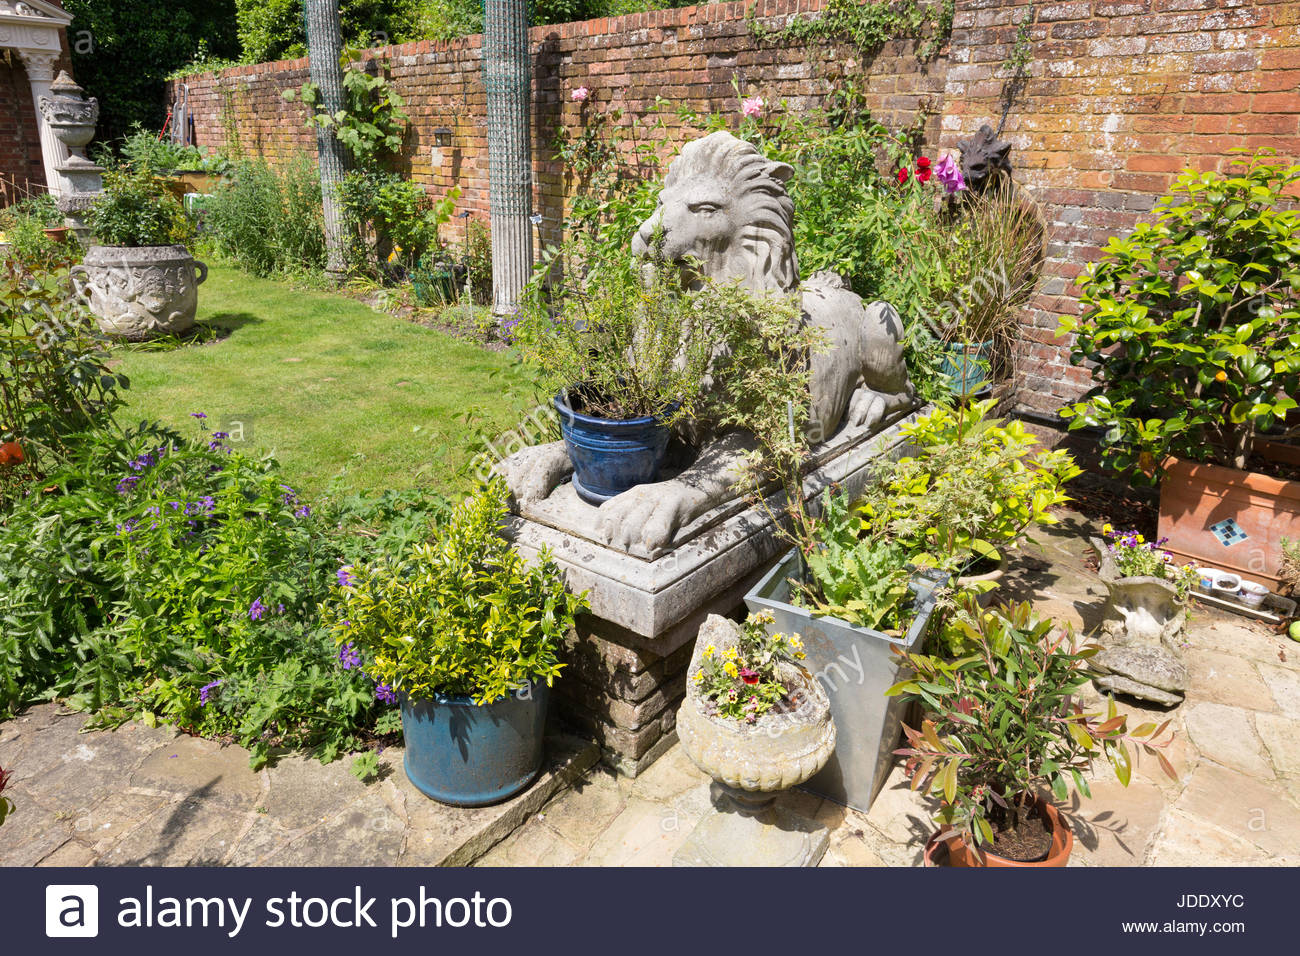 Large garden ornaments including lion statues and pots in an ornate english  garden, Kent England UK